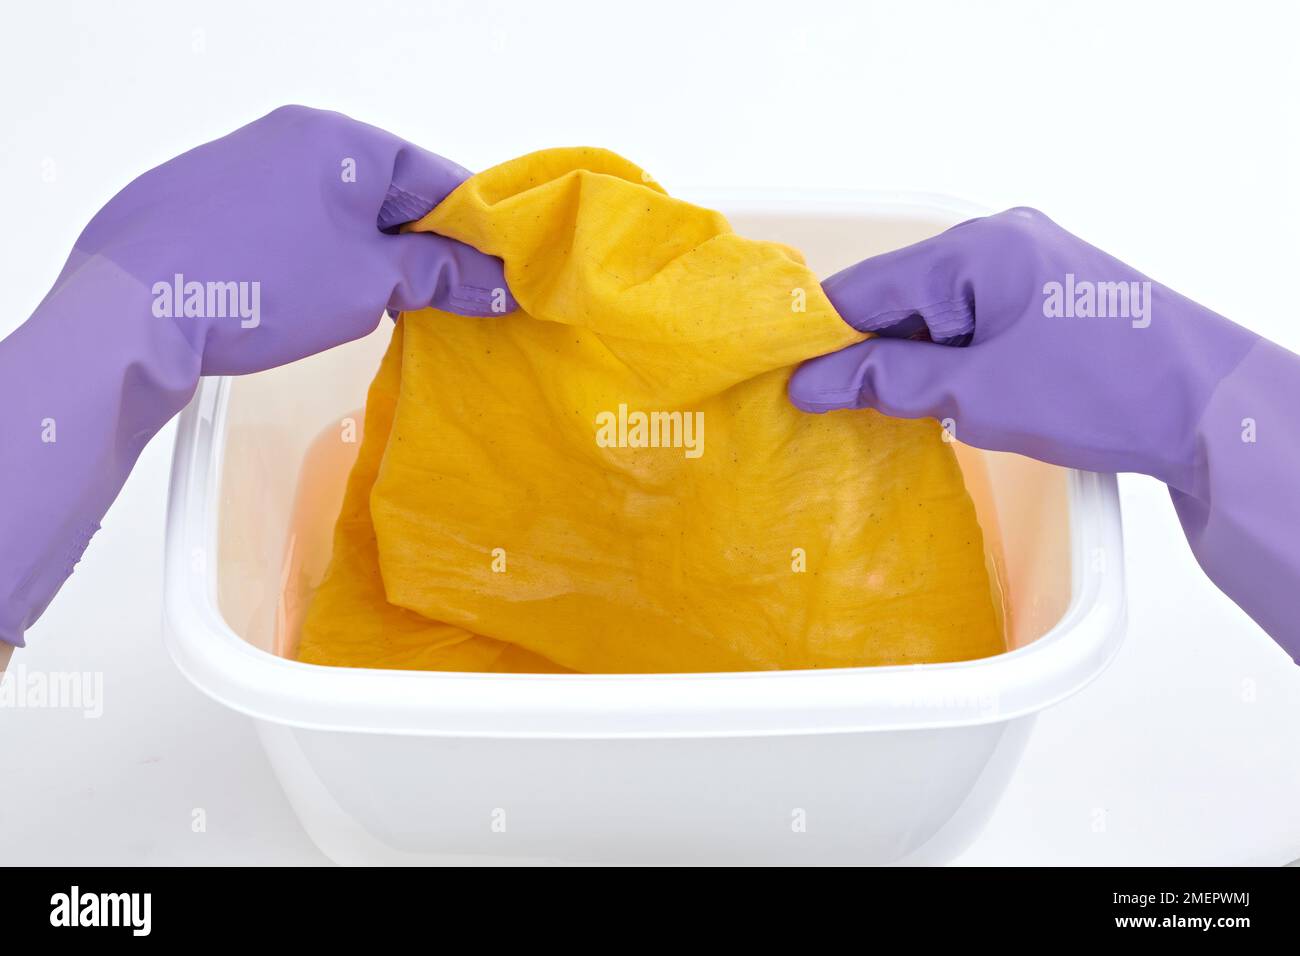 Dyeing fabric, removing item from dye bath, close-up Stock Photo